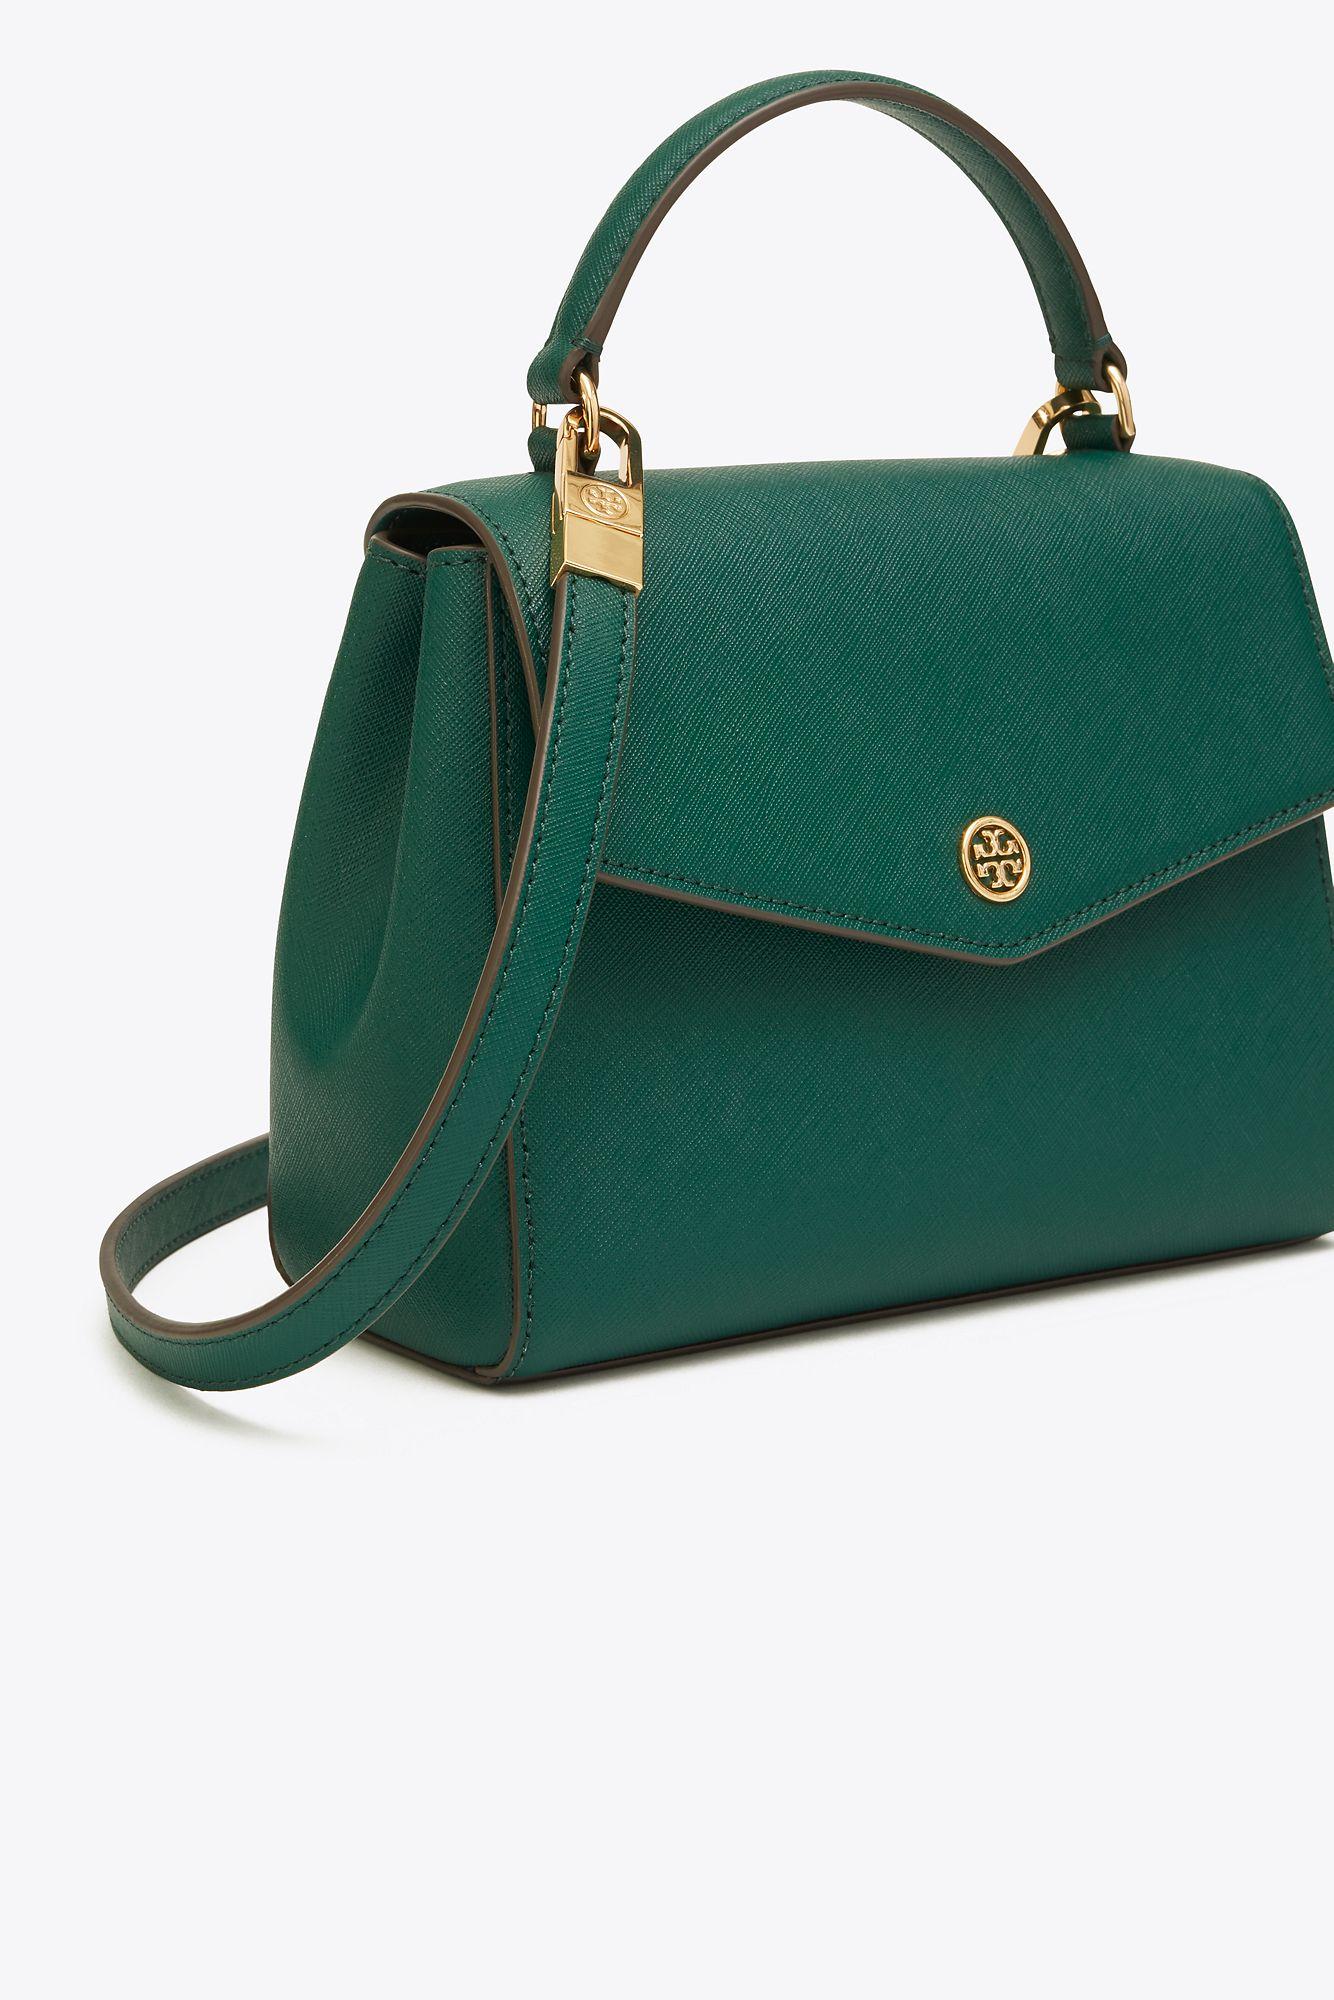 NWT!!TORY BURCH ROBINSON SMALL ZIP TOTE SATCHEL BAG Olive Color. Display